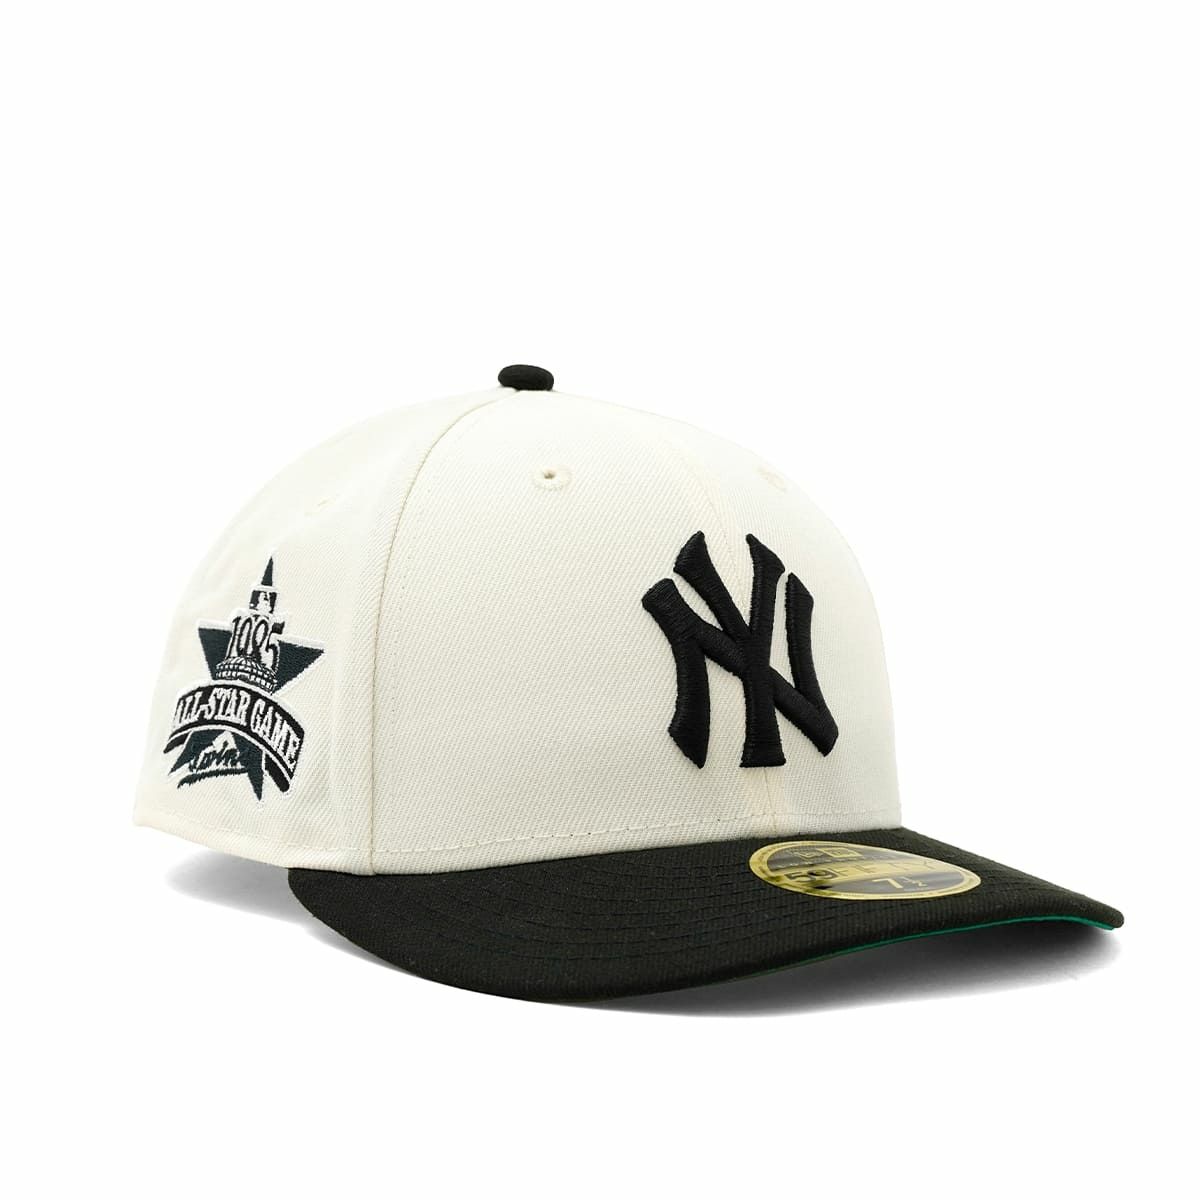 MFC STORE CUSTOM COLLECTION NEW ERA LP 59FIFTY NEWYANCO ASG1985 ...